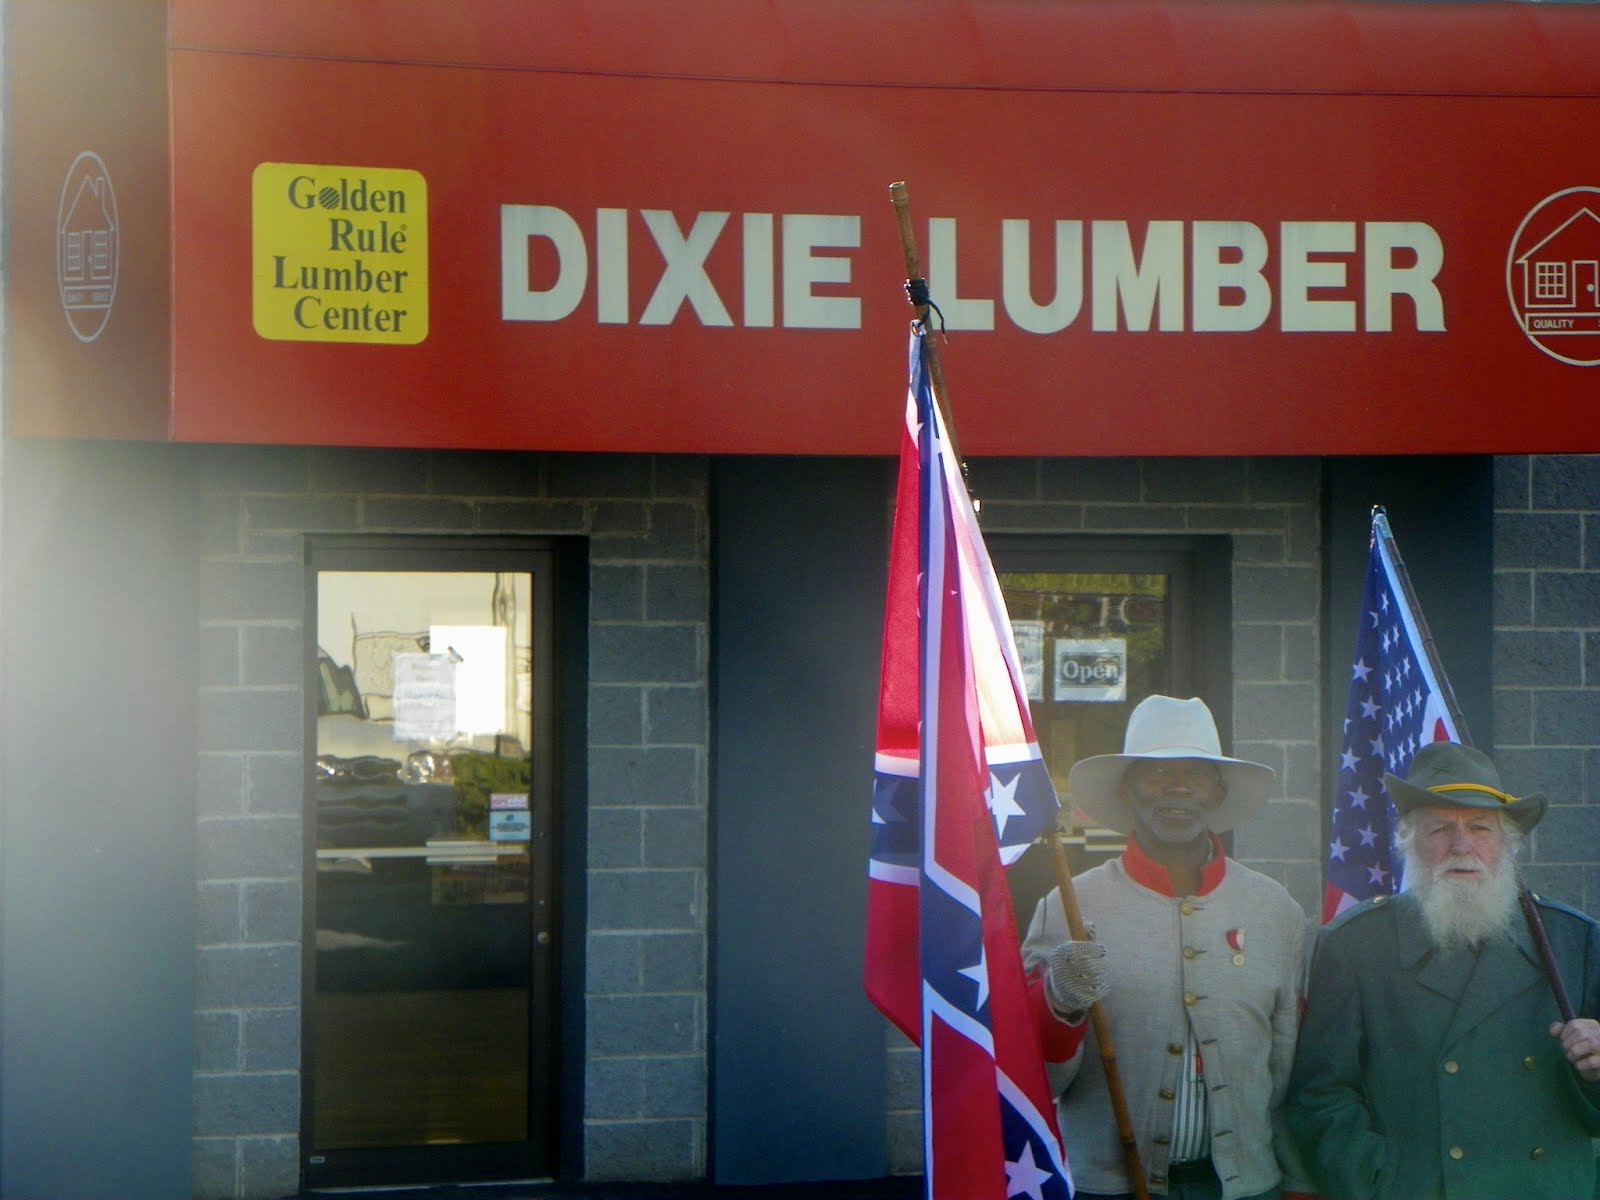 Pictures 5-10 are from Dixie Lumber Company in Easley